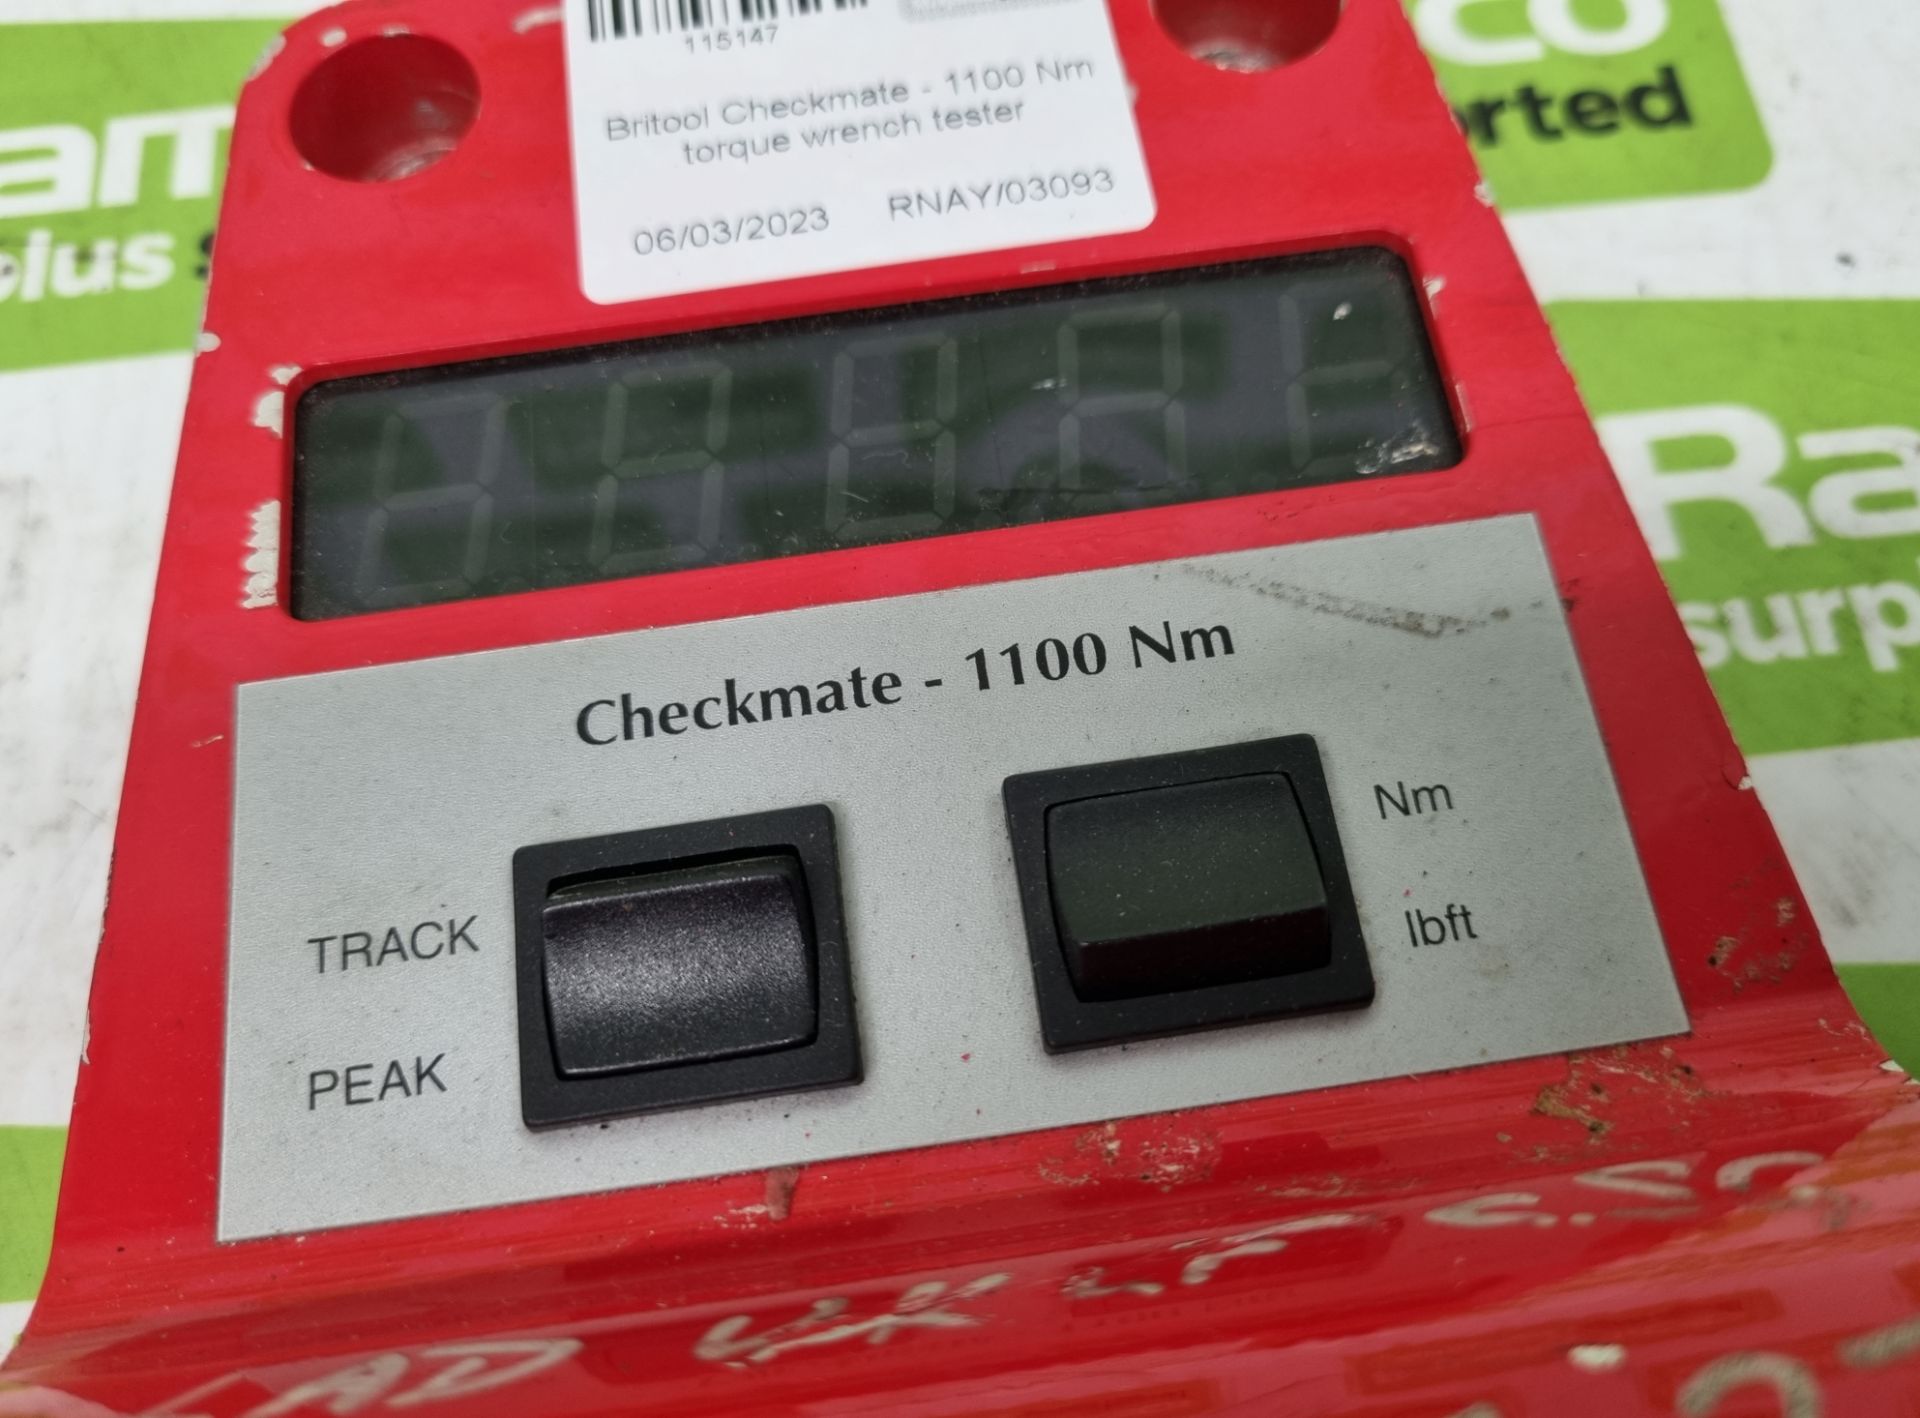 Britool Checkmate - 1100 Nm torque wrench tester - Image 2 of 6